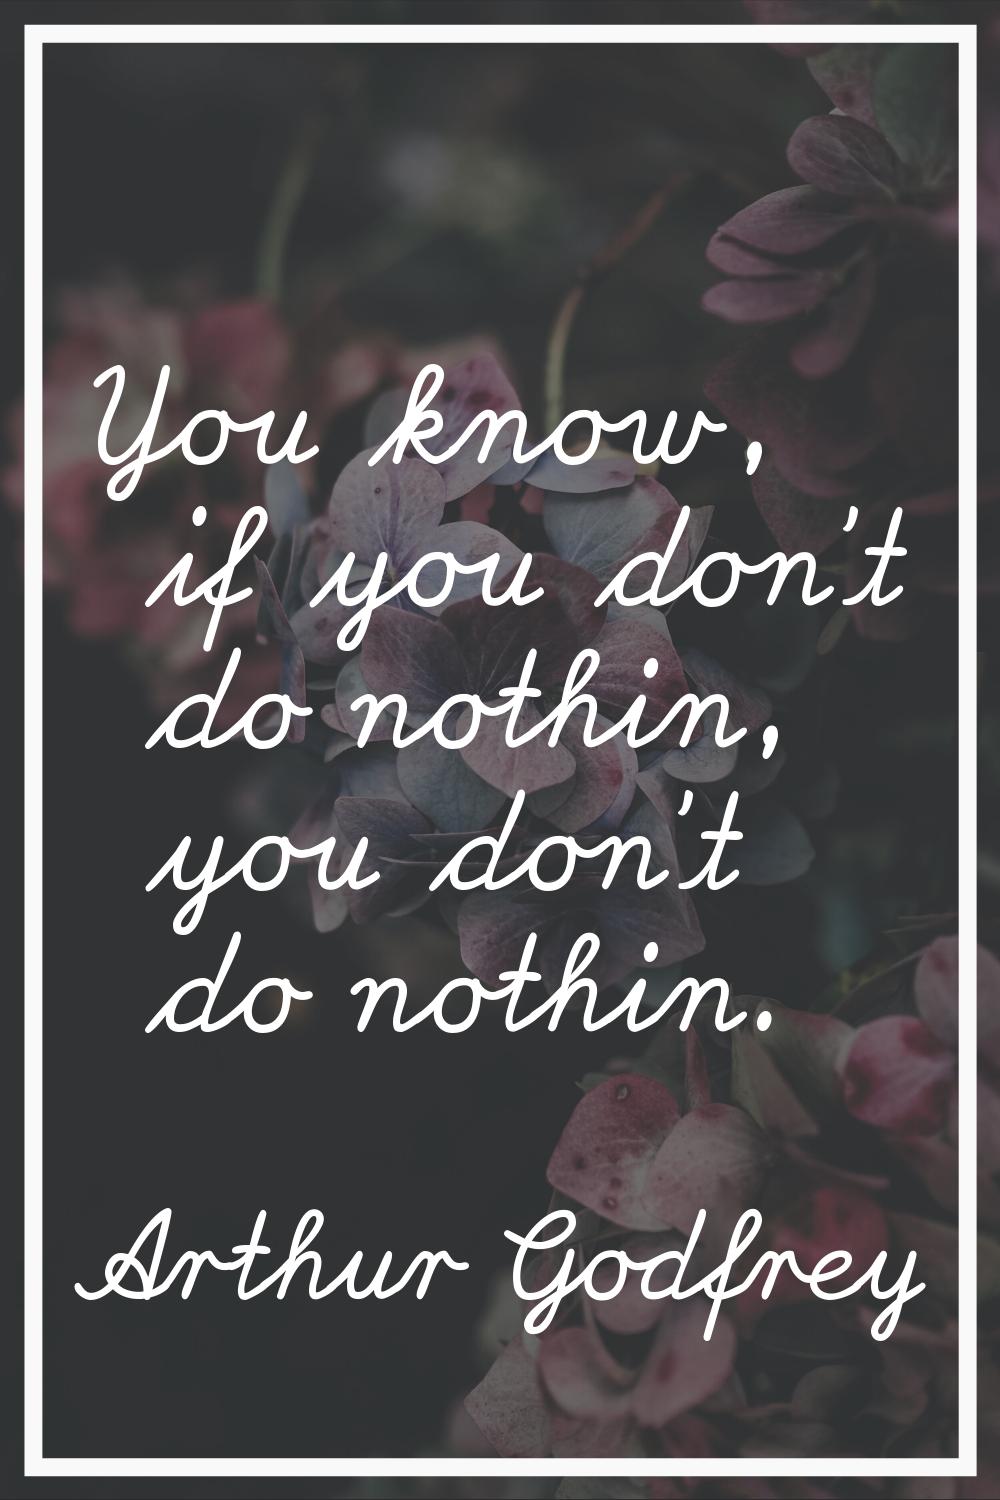 You know, if you don't do nothin, you don't do nothin.